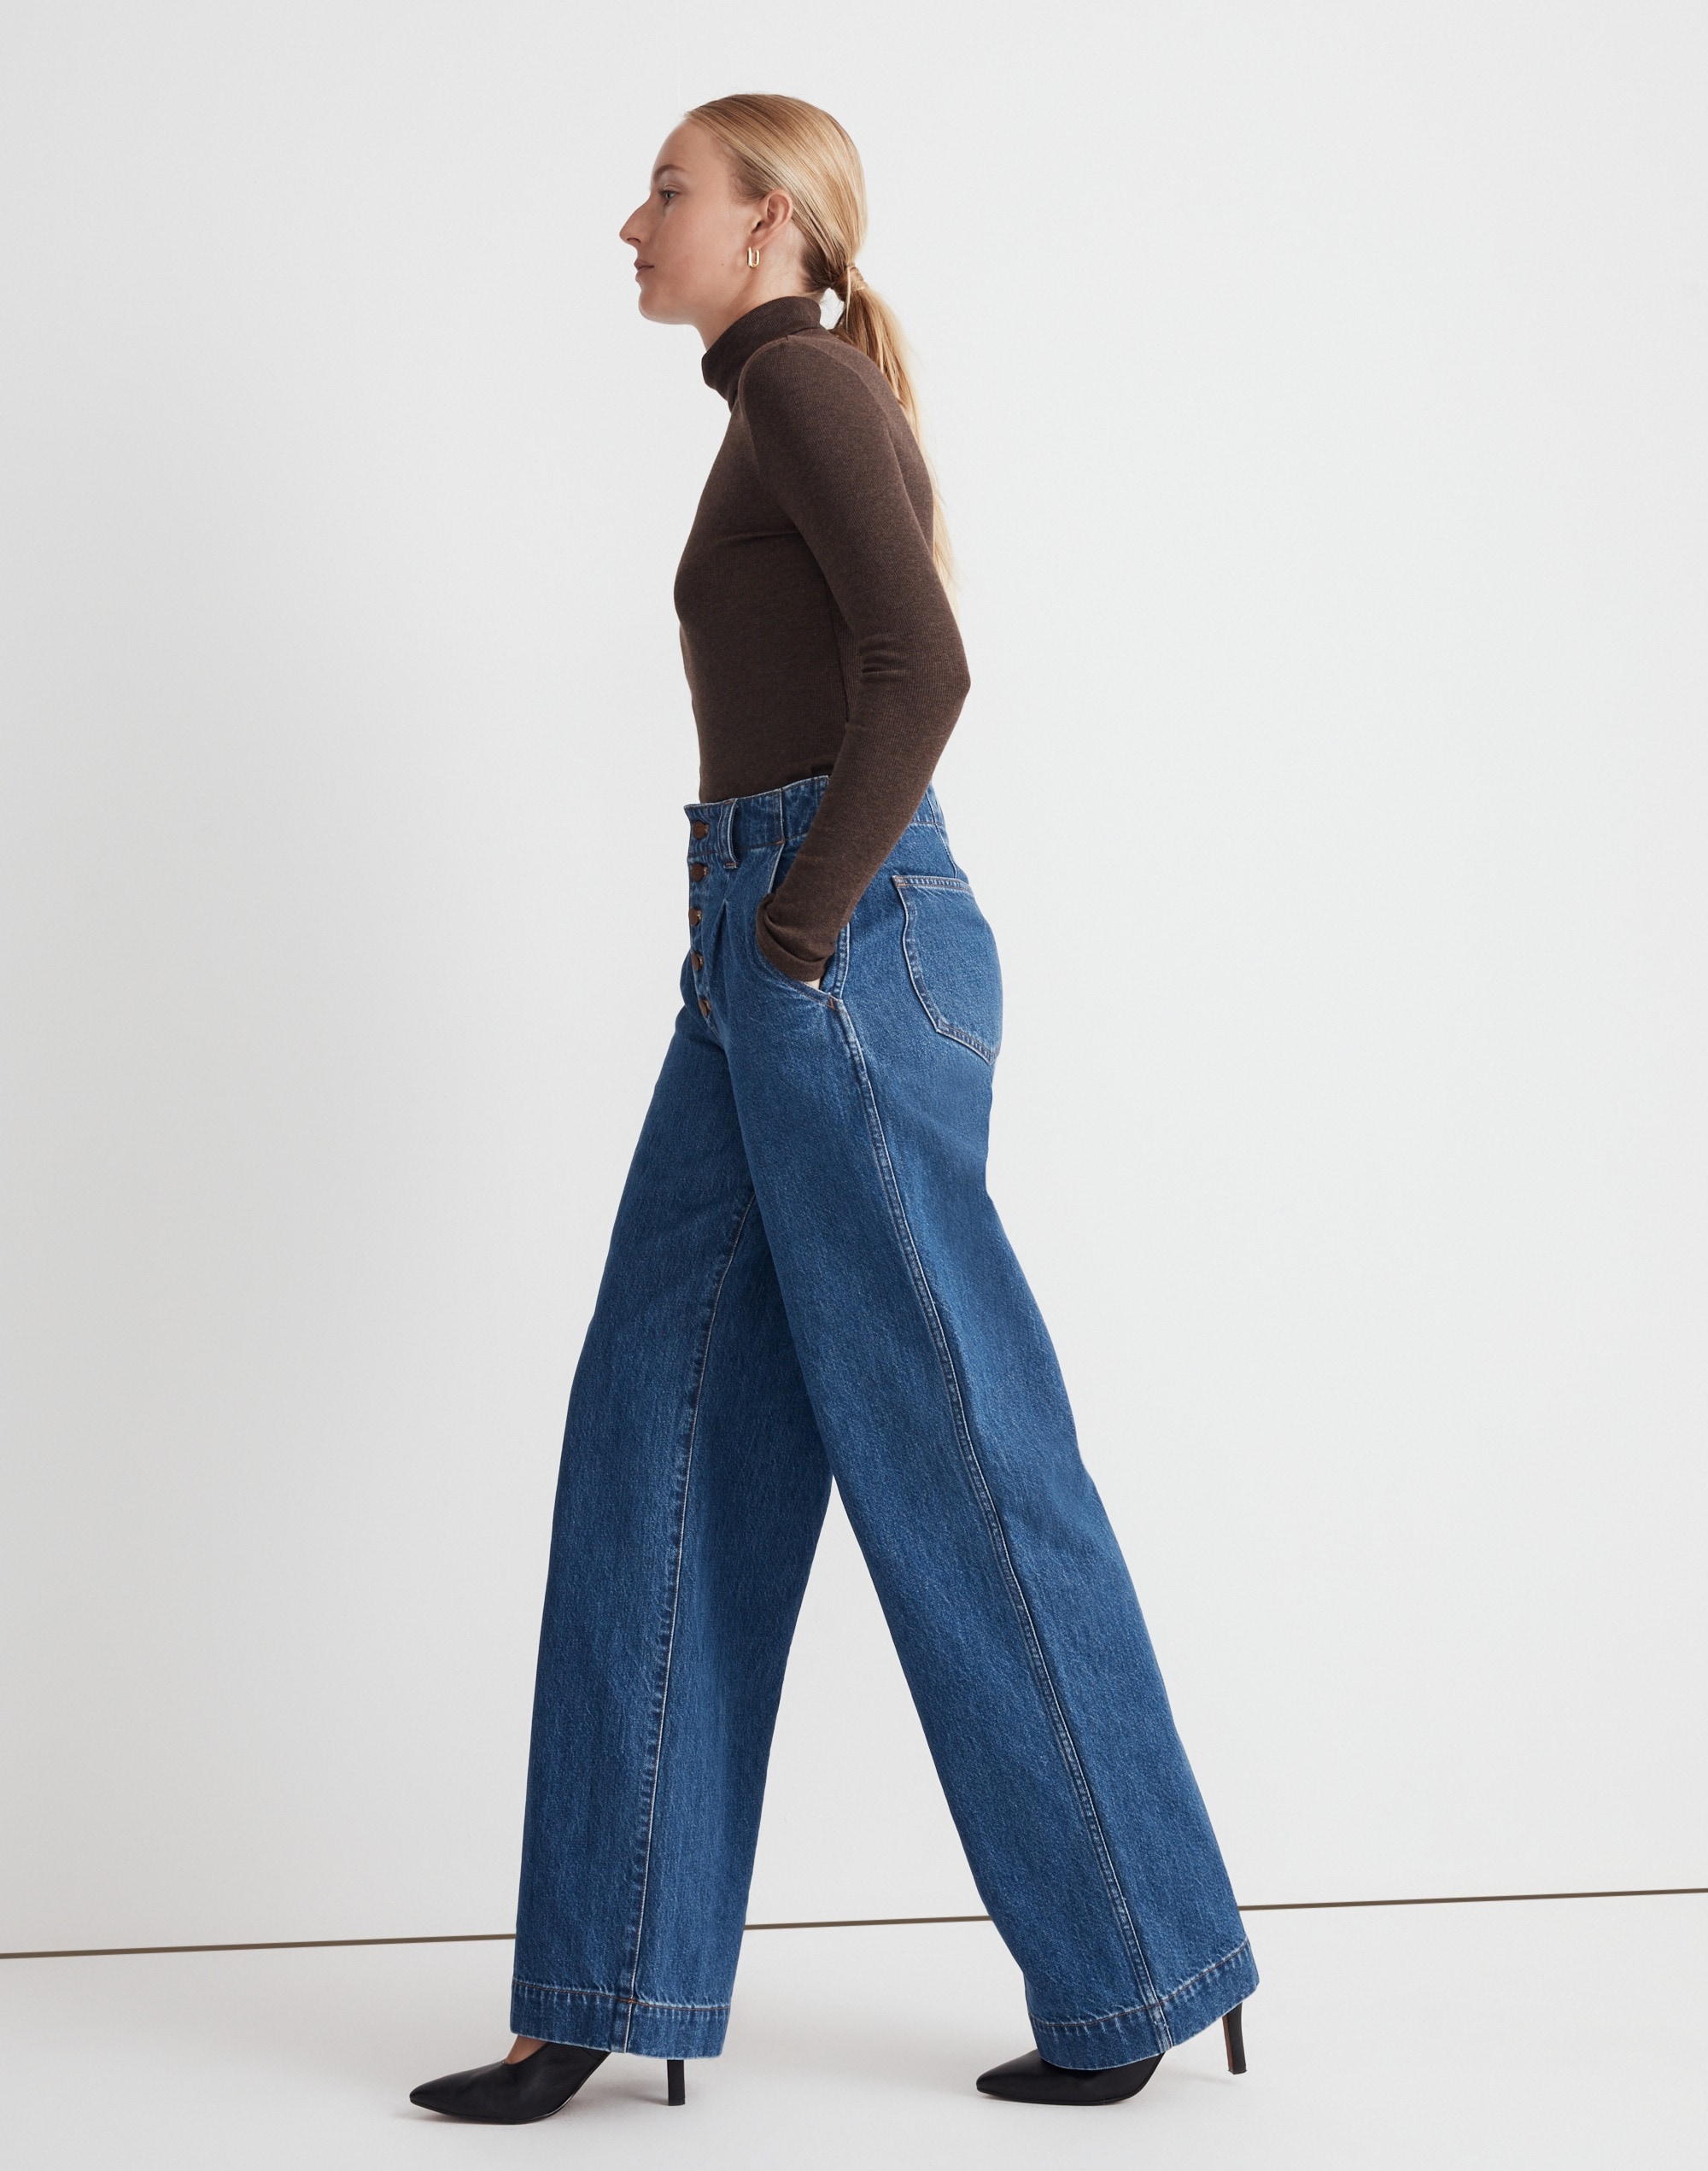 Superwide-Leg Jeans in Myler Wash: Pleated Edition